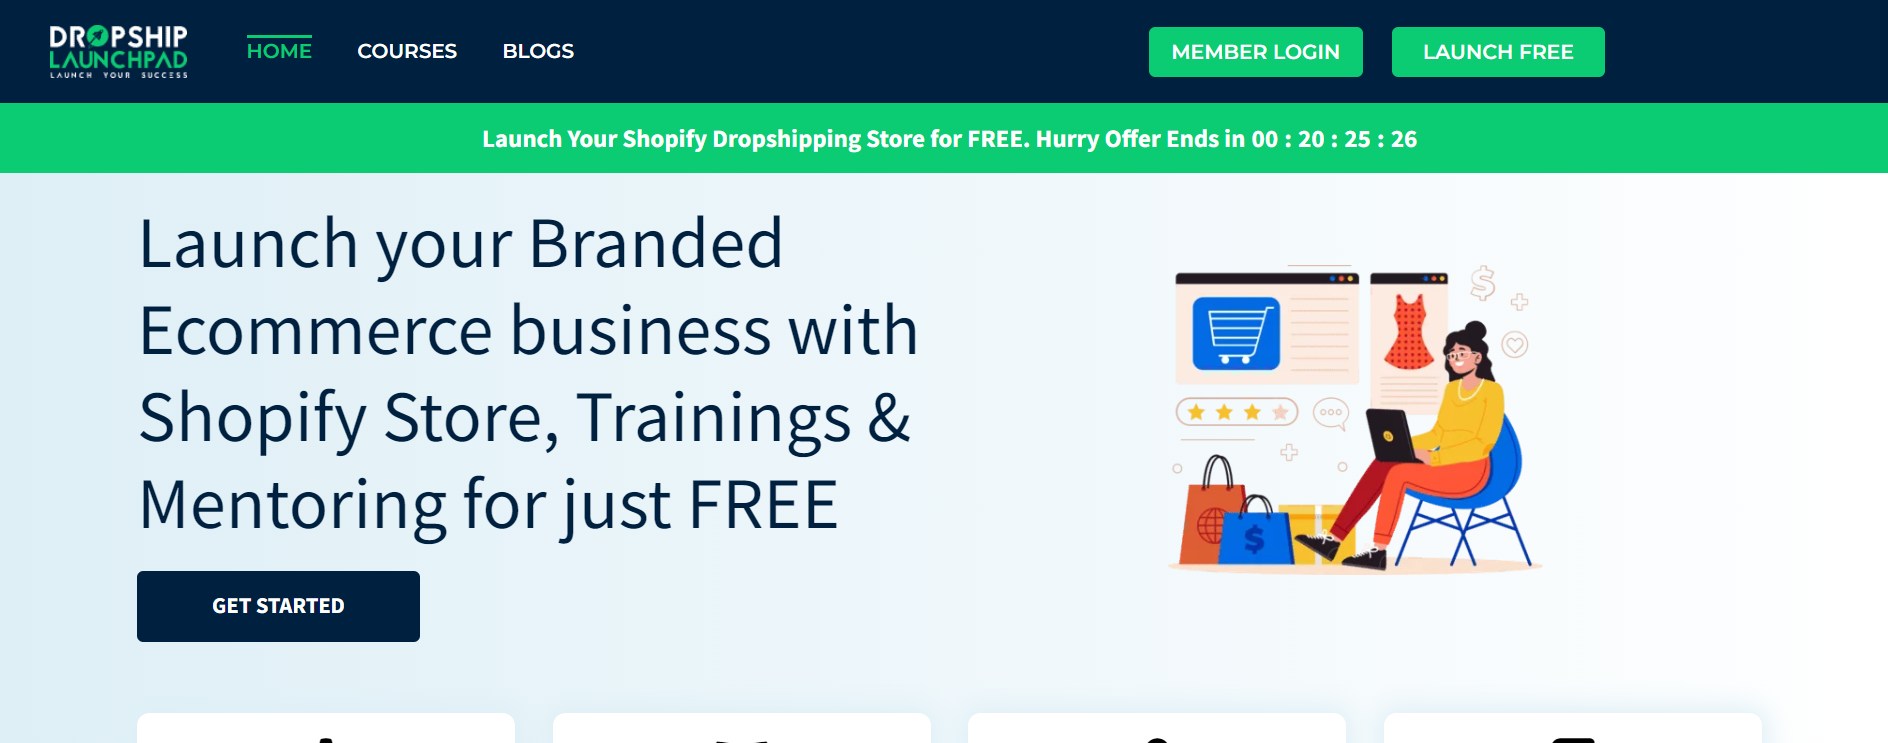 How can Dropship Launchpad help me start a dropshipping business in 2024?